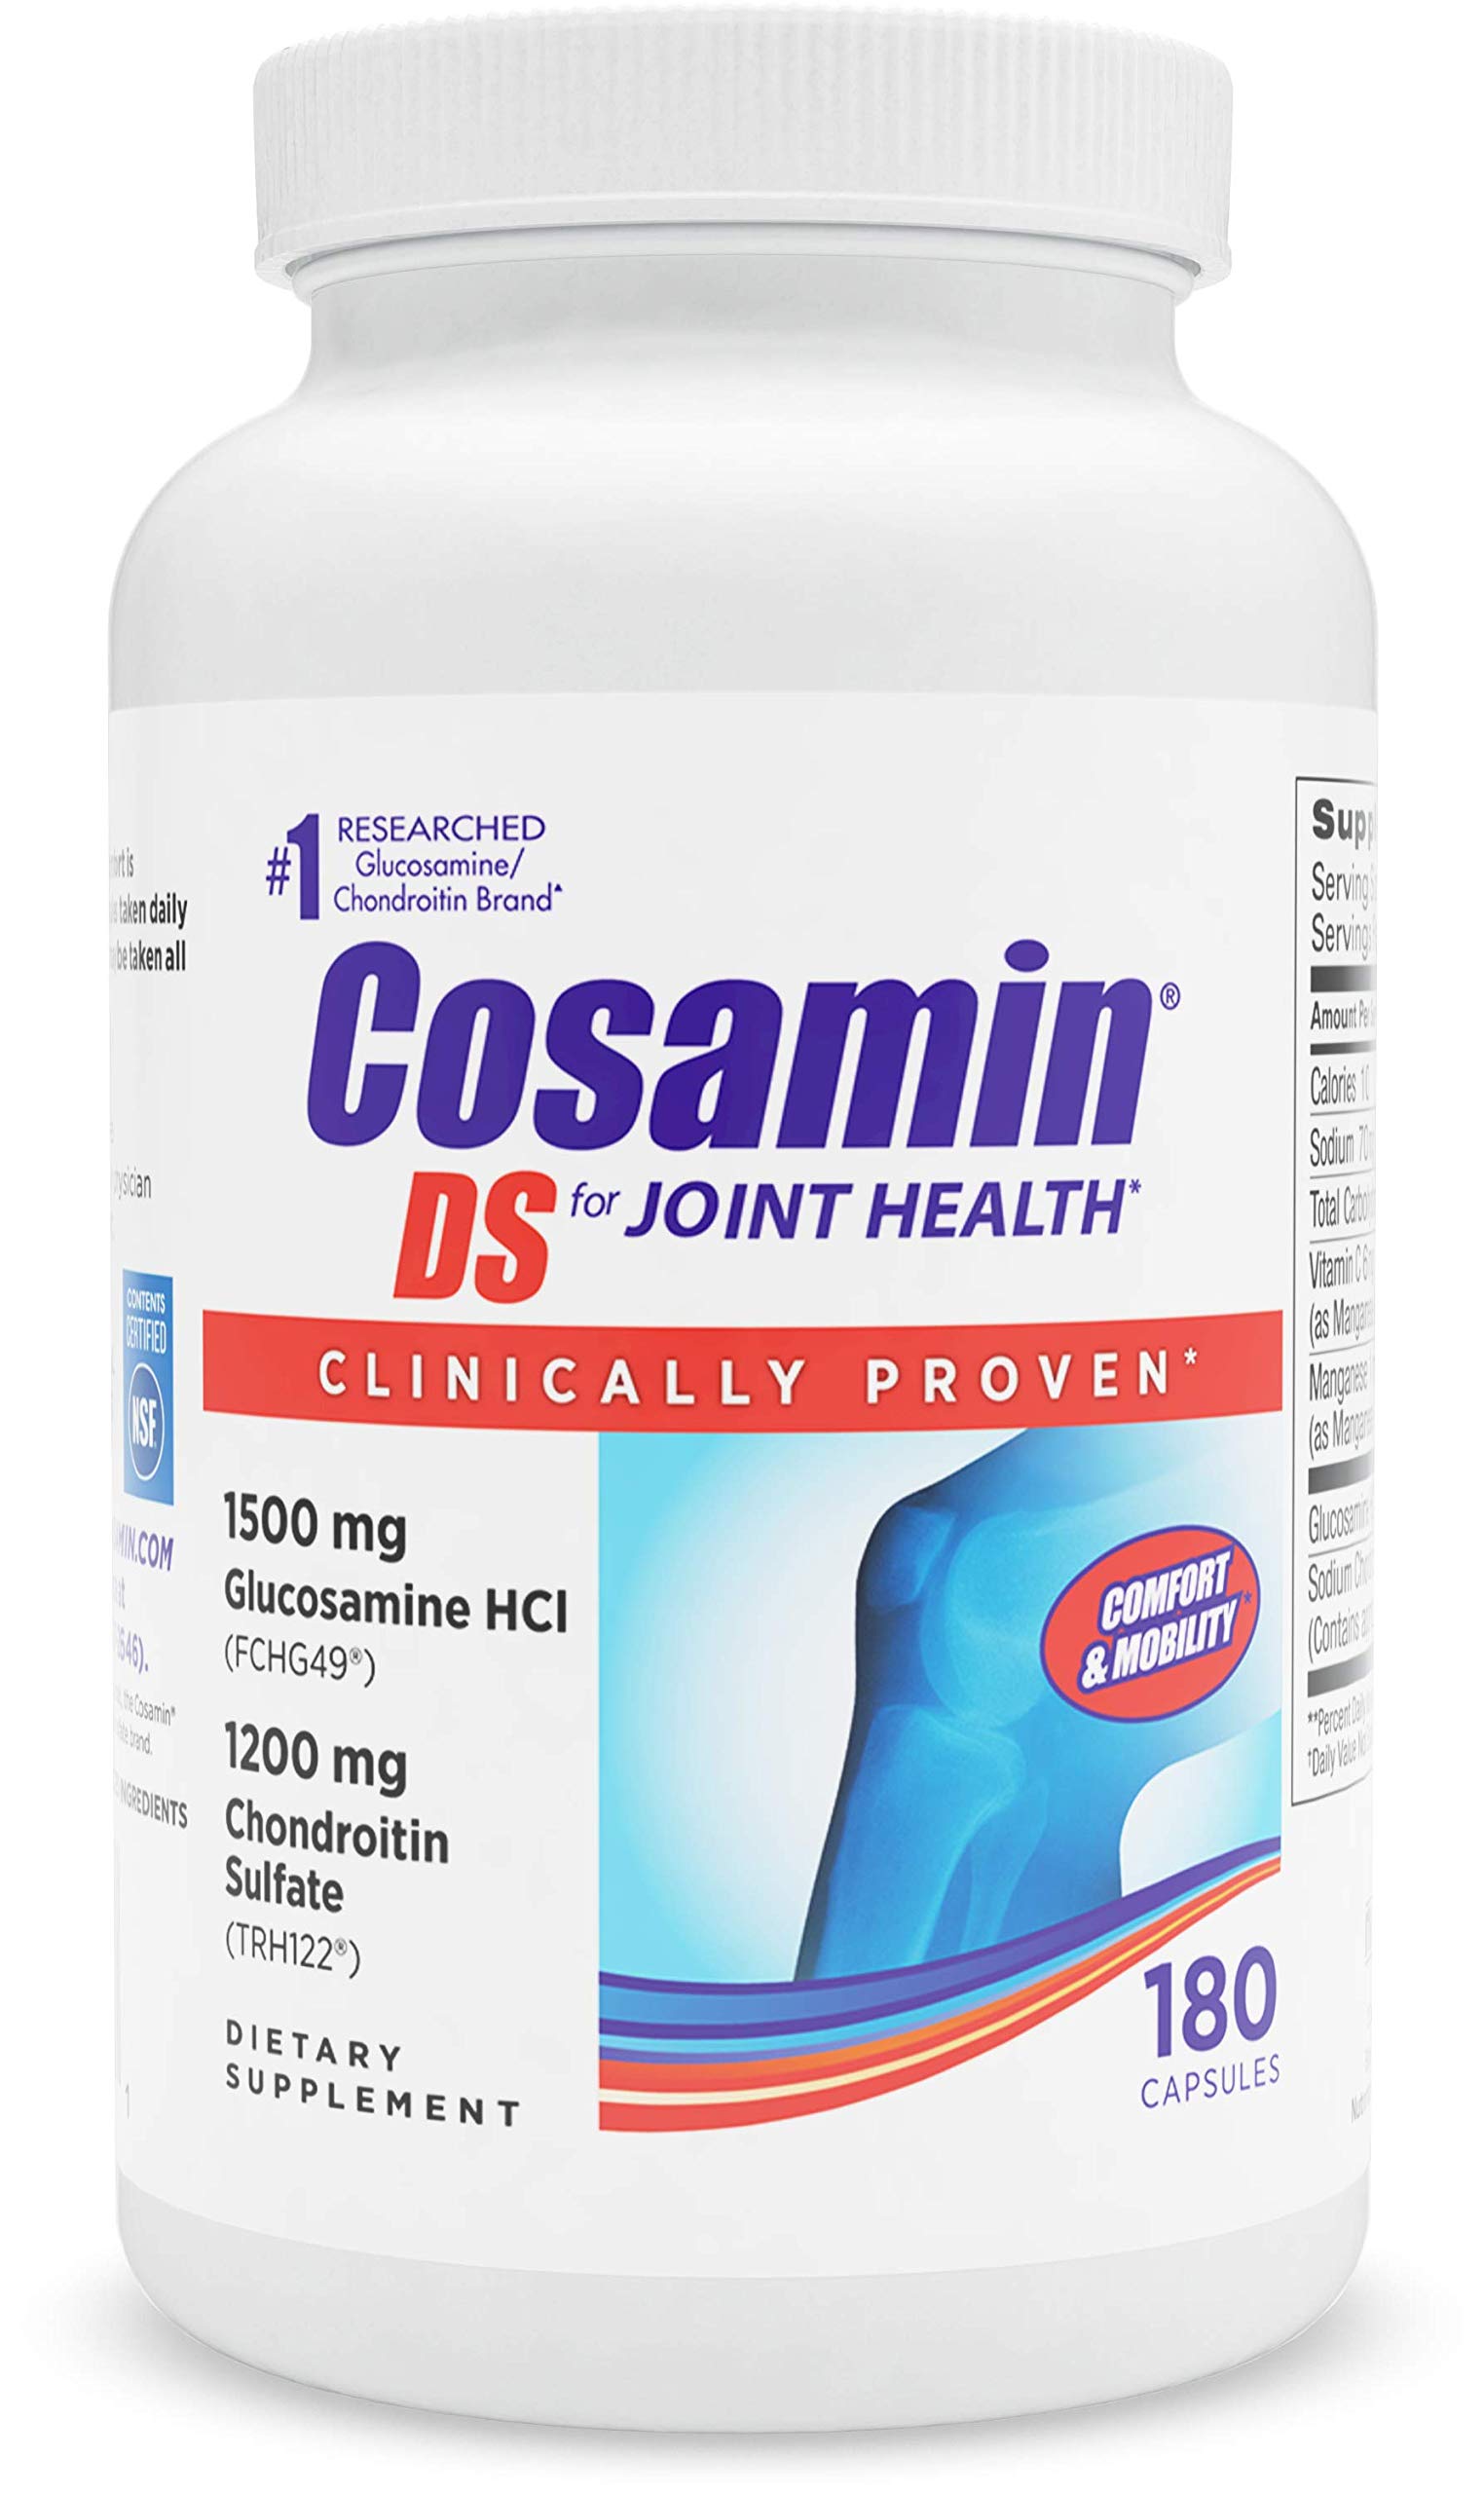 Cosamin DS #1 Researched Glucosamine & Chondroitin Joint Health Supplement, 180 Capsules